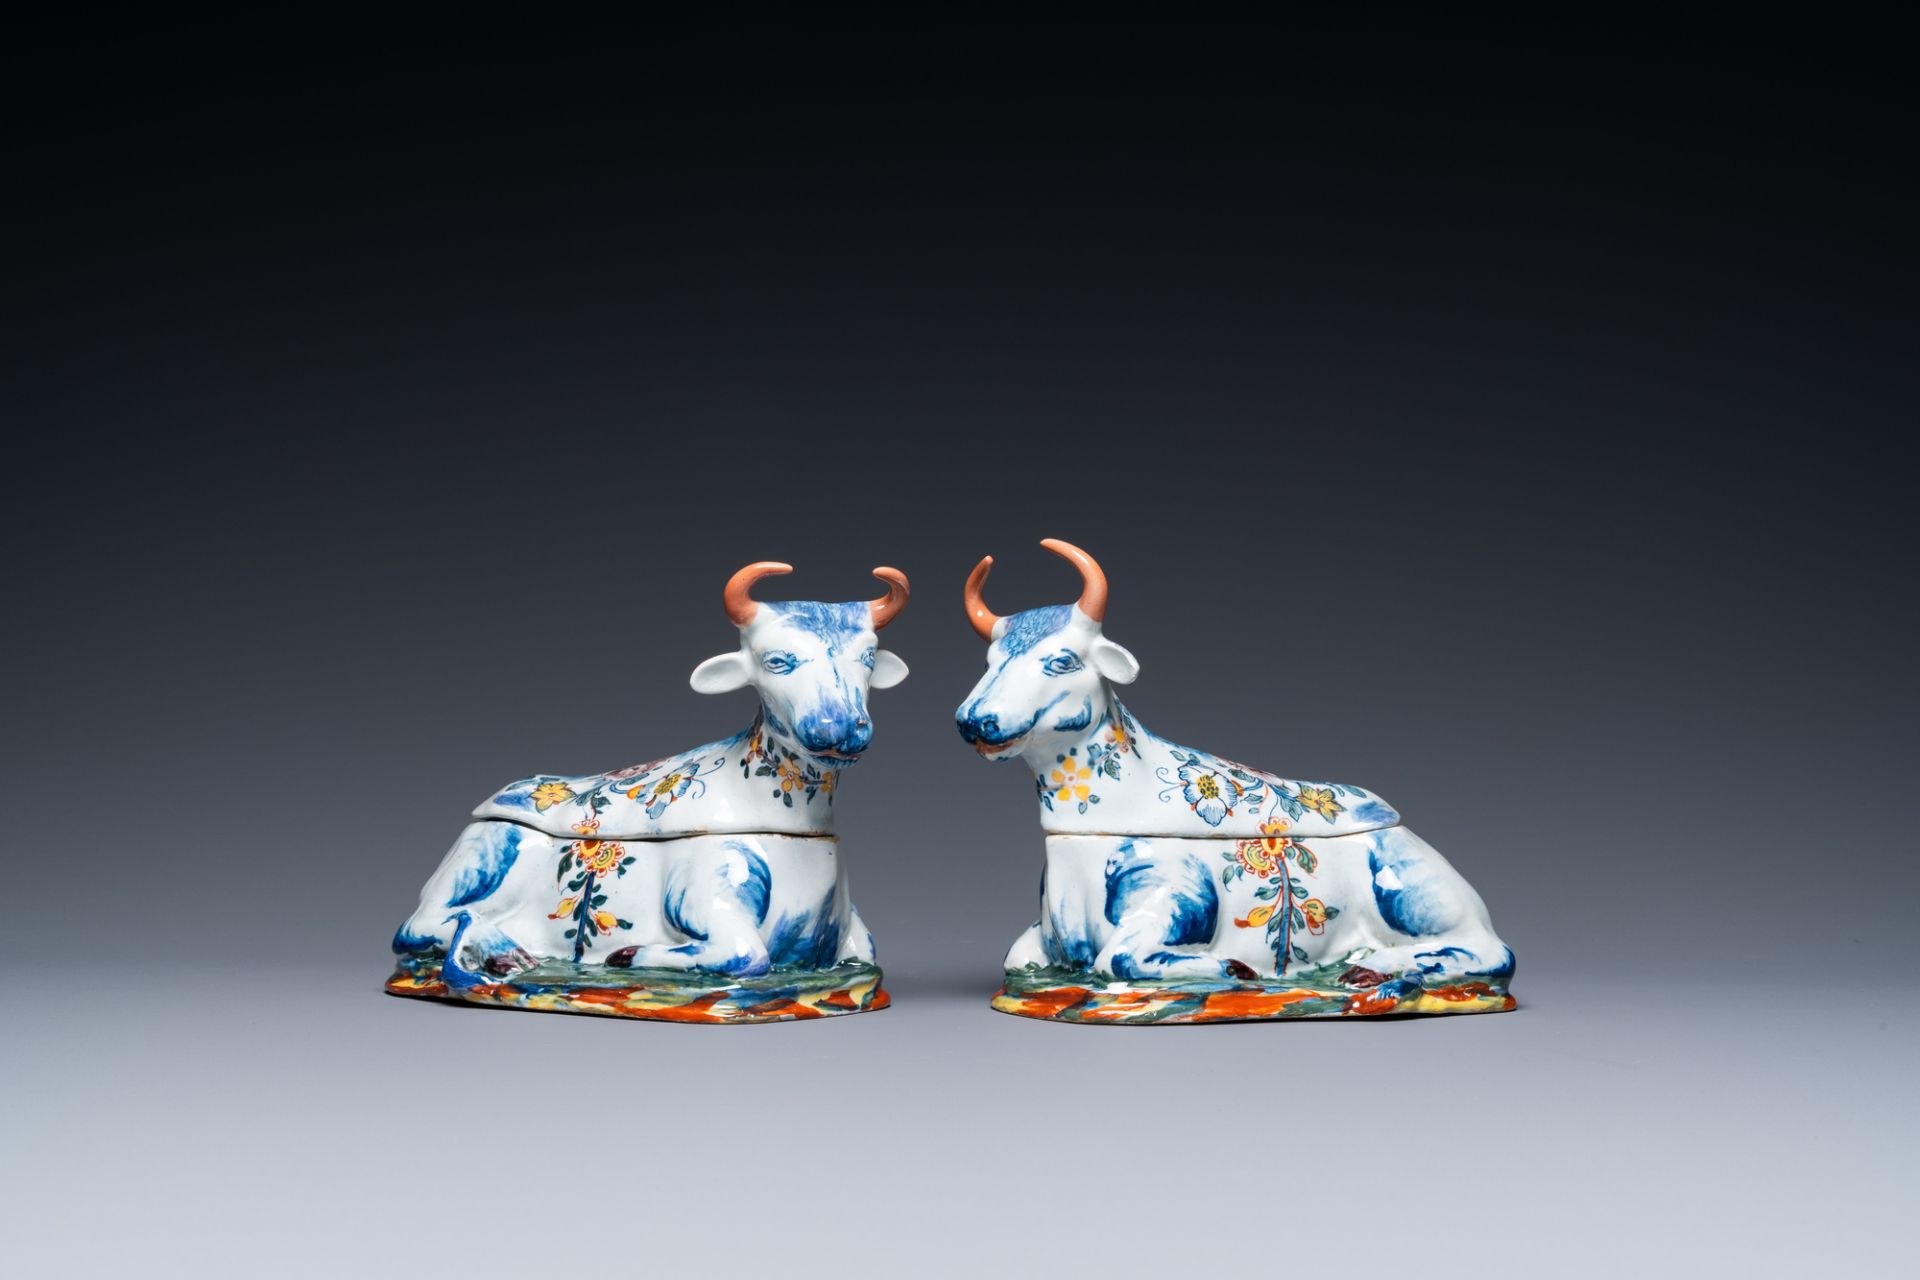 A pair of polychrome Dutch Delft cow-shaped tureens, 18th C.